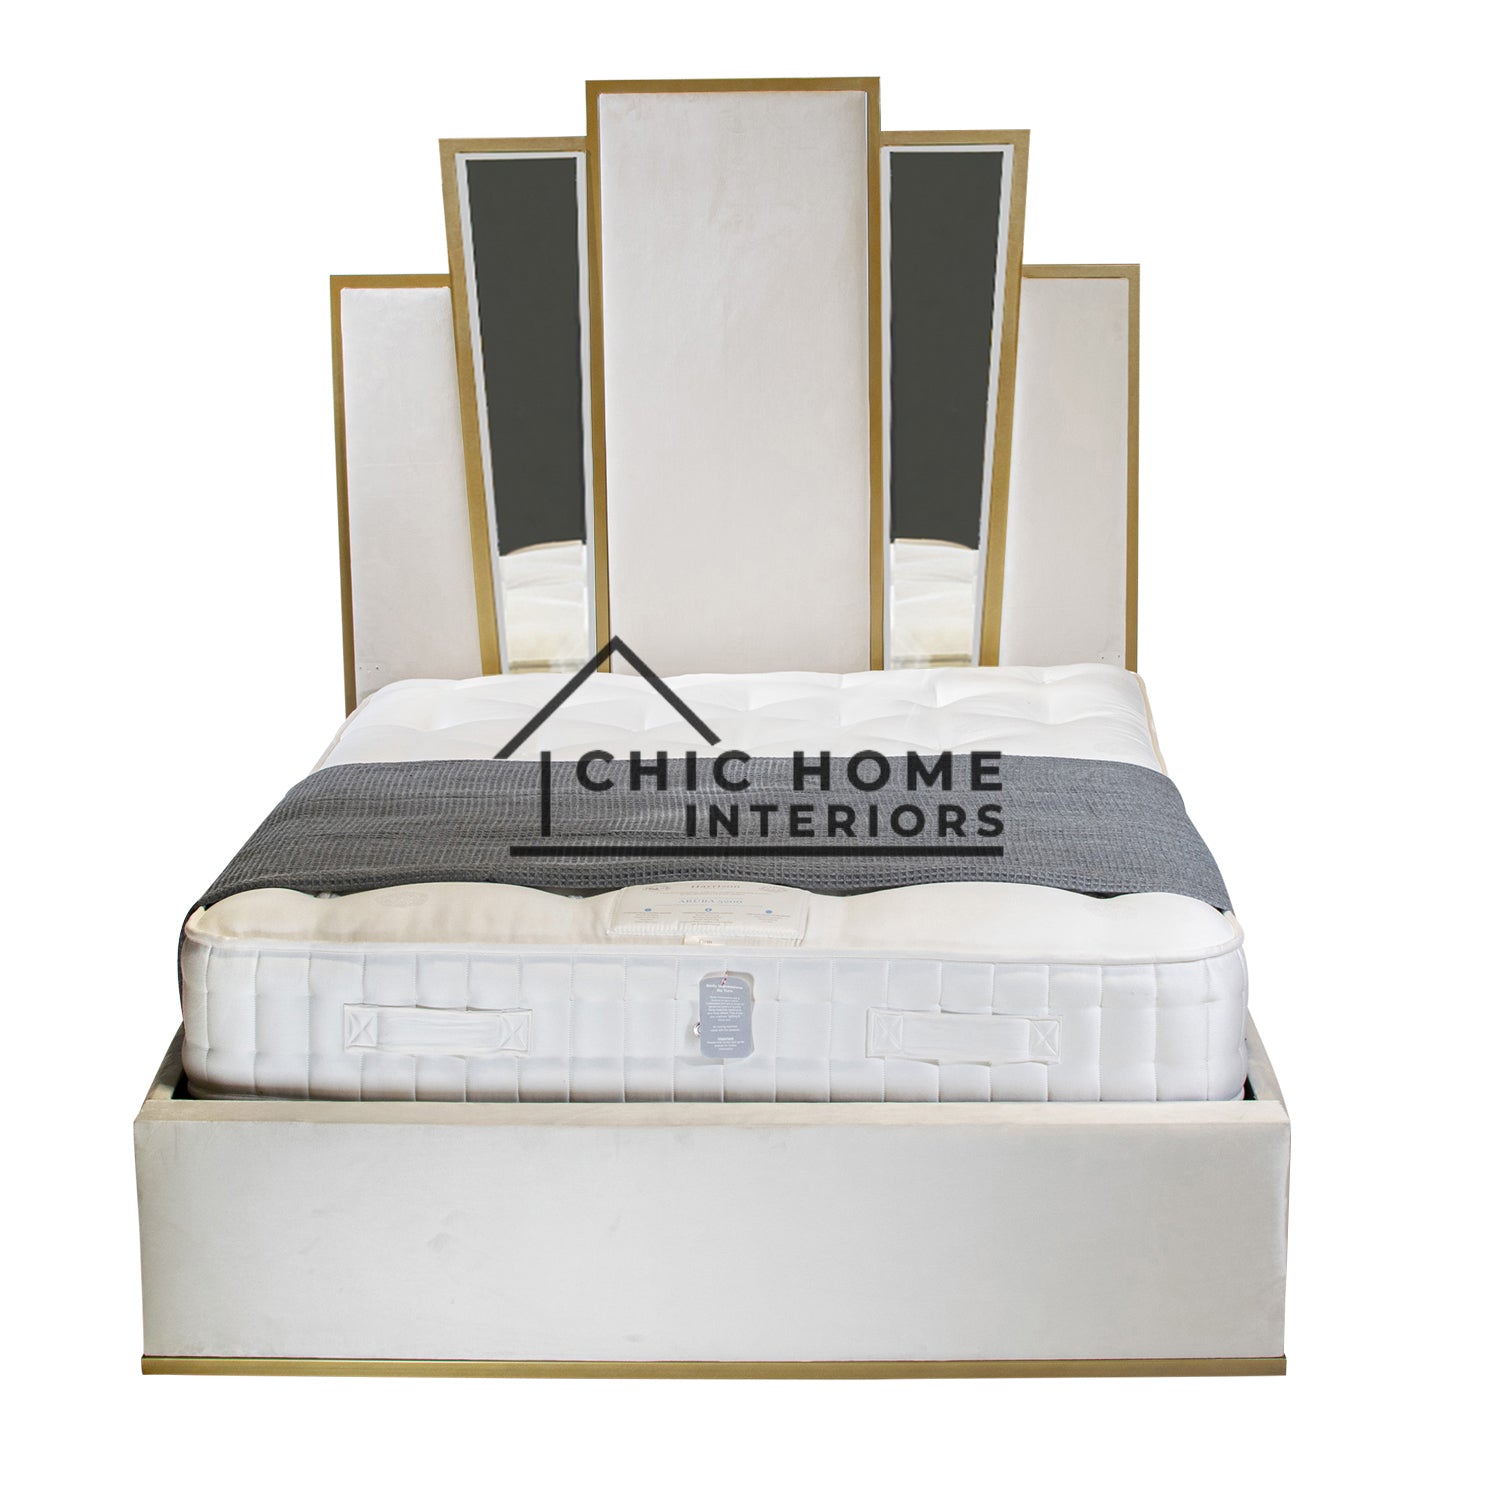 The Bespoke Great Gatsby Bed